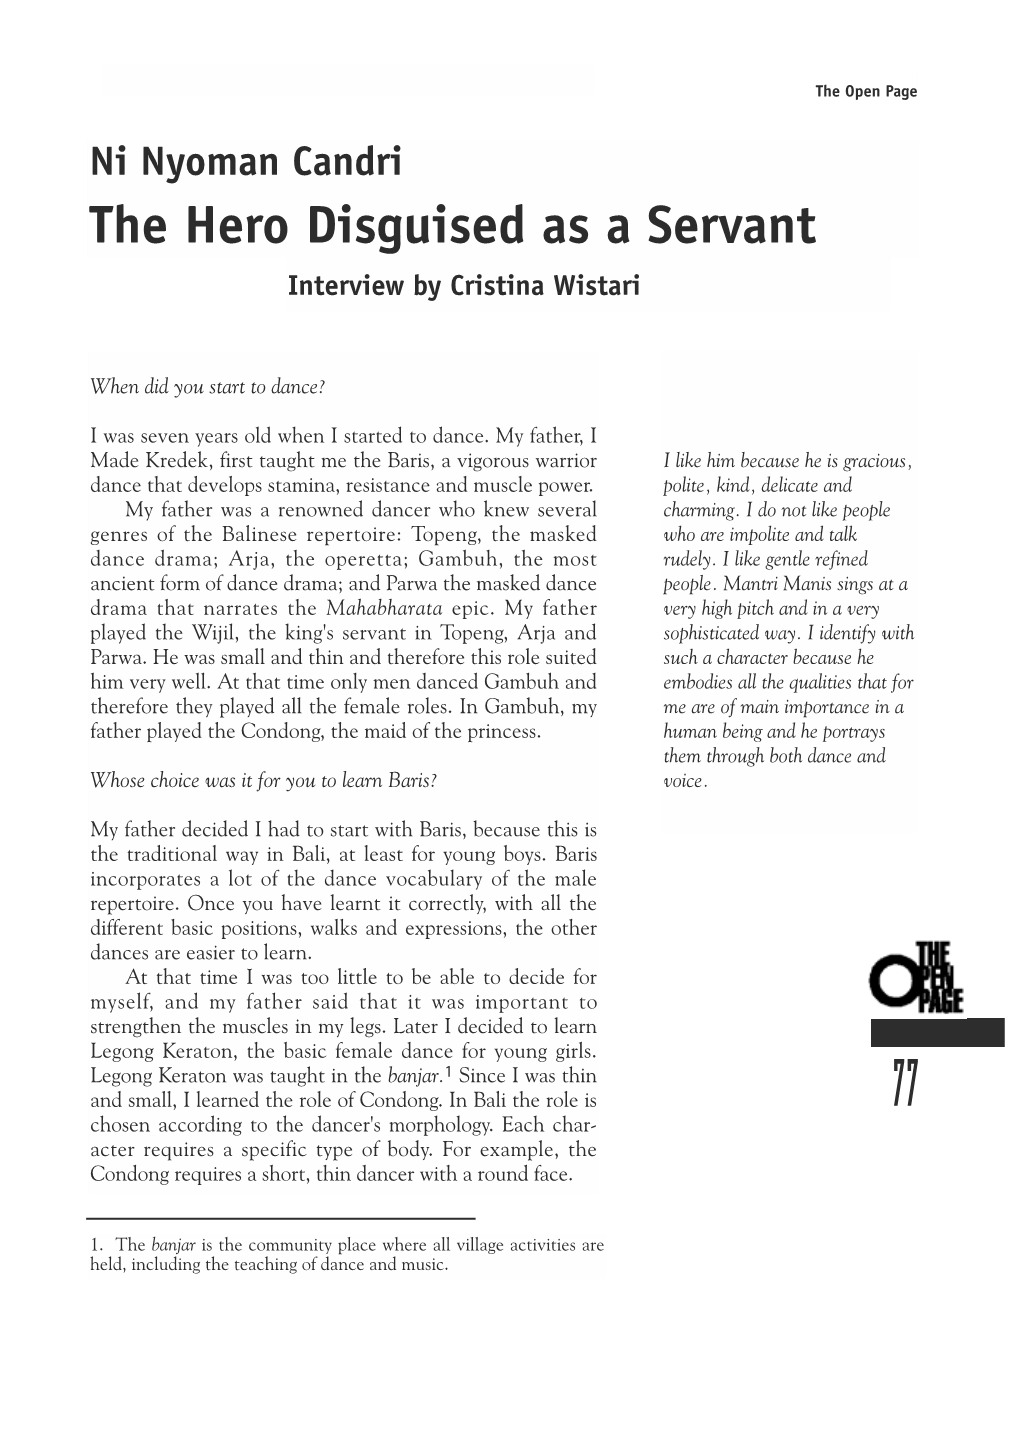 The Hero Disguised As a Servant Interview by Cristina Wistari